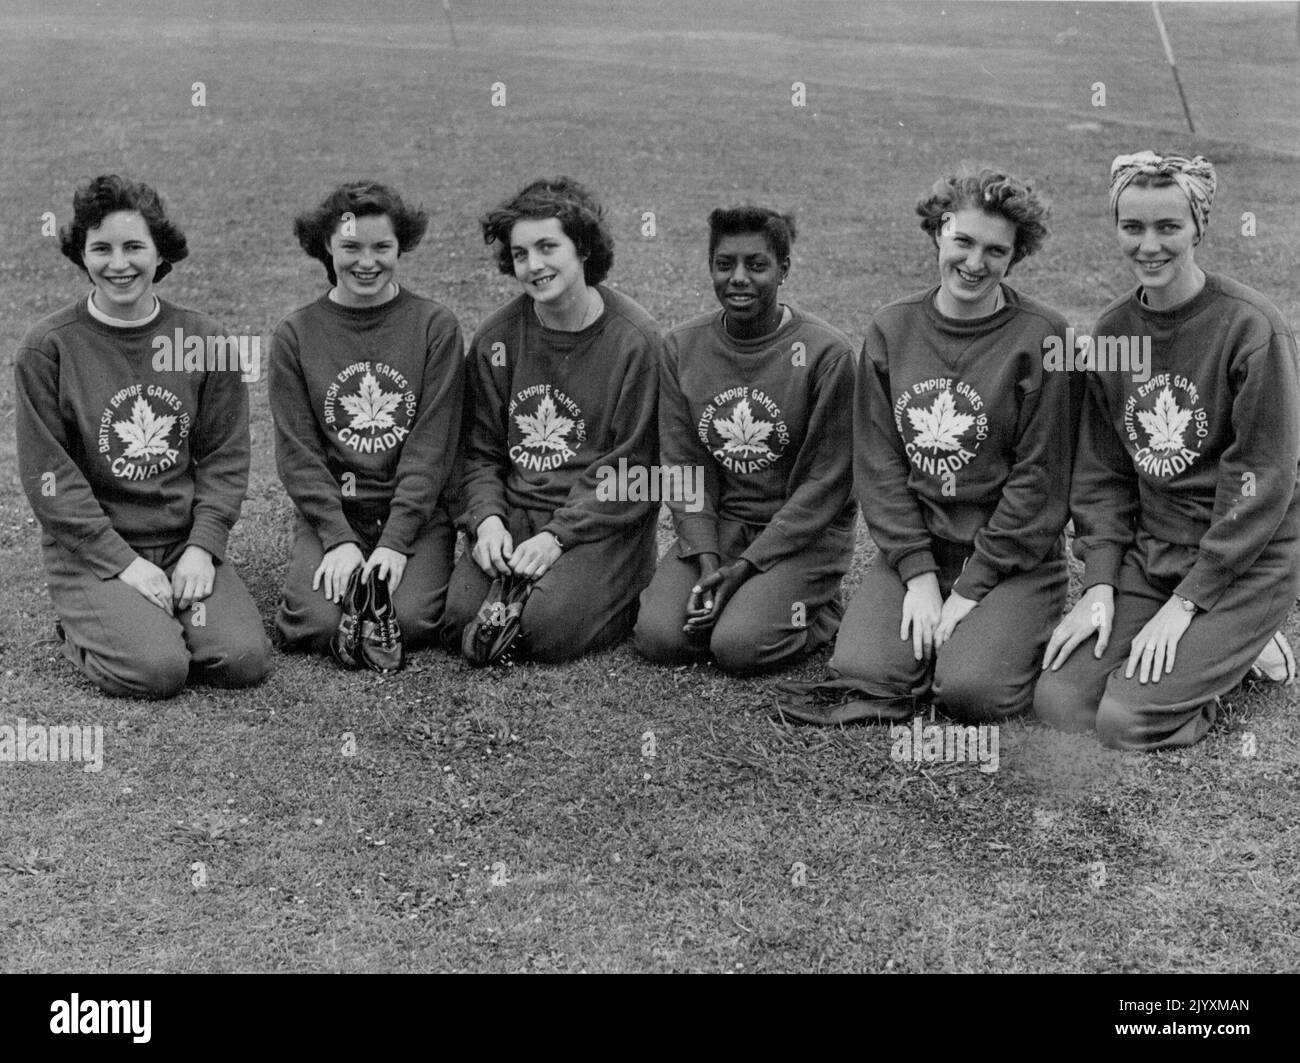 Six of the girls in their track suits. Left to Right are Elaine Silburn, Gerry Bemister, Pat Jones, Rosella Thorne, Eleanor McKenzie and Shirley Gordon. Canadian girl Athletes in track training at Auckland. The Canadians were the first team to arrive in NZ for the Empire Games, which will be held from February 4 to 11. From left the girls are Eaine Silburn, Gerry Bernister, Pat Jones, Rosella Thorne, Eleanor McKenzie and Shirley Gordon. January 19, 1950. Stock Photo